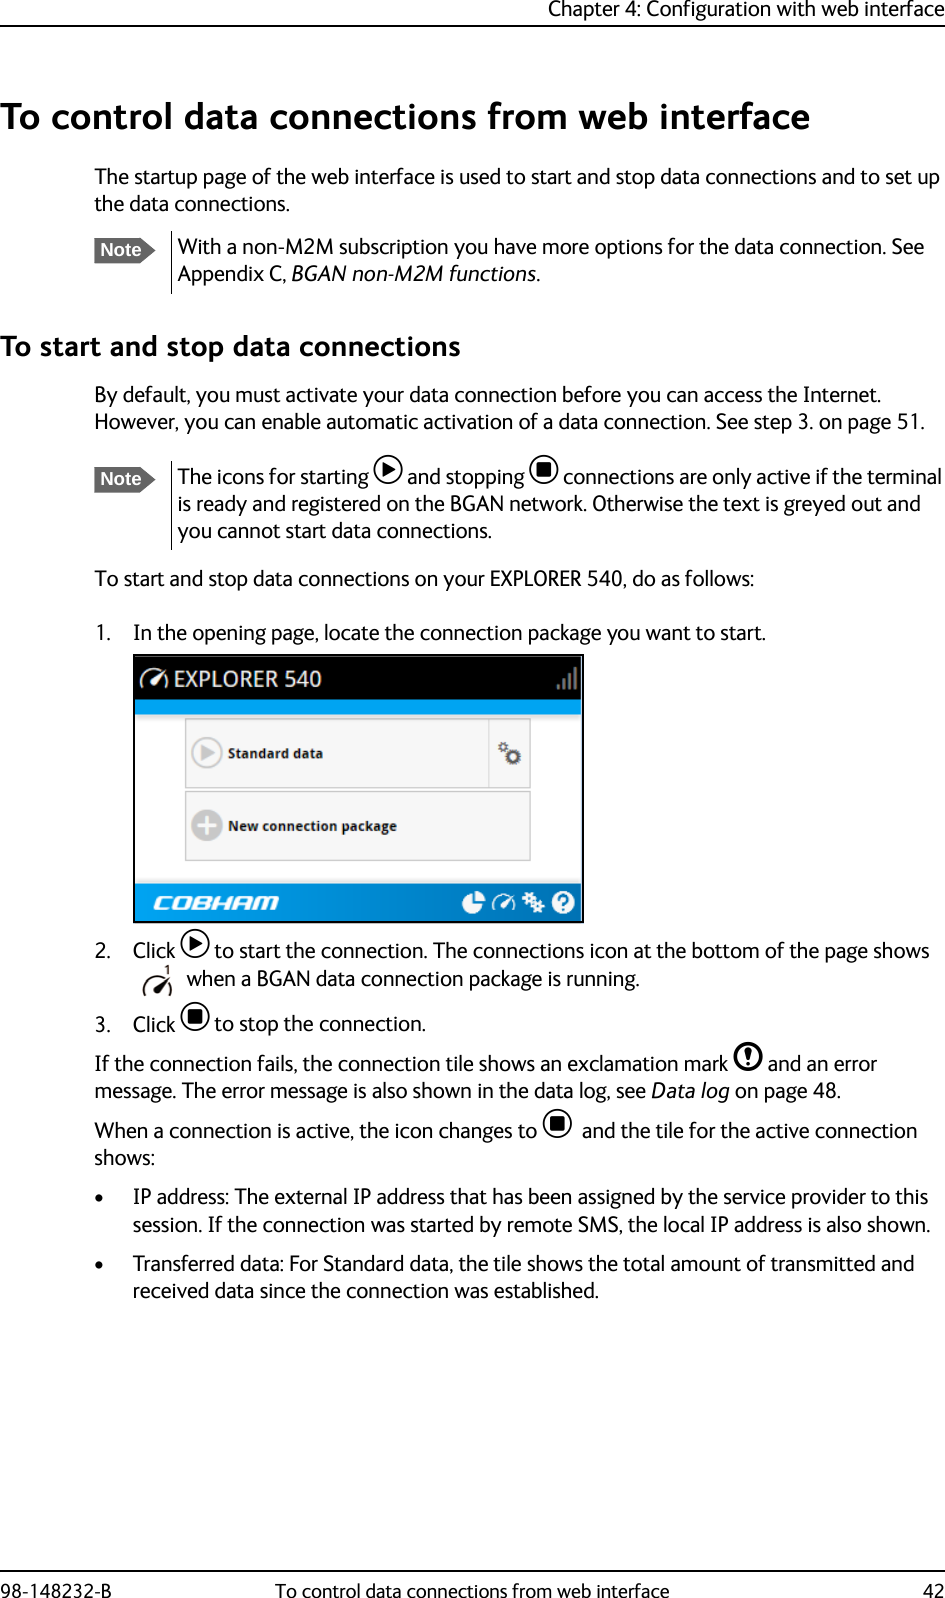 Chapter 4: Configuration with web interface98-148232-B To control data connections from web interface 42To control data connections from web interfaceThe startup page of the web interface is used to start and stop data connections and to set up the data connections. To start and stop data connectionsBy default, you must activate your data connection before you can access the Internet. However, you can enable automatic activation of a data connection. See step 3. on page 51. To start and stop data connections on your EXPLORER 540, do as follows:1. In the opening page, locate the connection package you want to start.2. Click  to start the connection. The connections icon at the bottom of the page shows when a BGAN data connection package is running.3. Click  to stop the connection.If the connection fails, the connection tile shows an exclamation mark  and an error message. The error message is also shown in the data log, see Data log on page 48.When a connection is active, the icon changes to   and the tile for the active connection shows:• IP address: The external IP address that has been assigned by the service provider to this session. If the connection was started by remote SMS, the local IP address is also shown.• Transferred data: For Standard data, the tile shows the total amount of transmitted and received data since the connection was established.NoteWith a non-M2M subscription you have more options for the data connection. See Appendix C, BGAN non-M2M functions.NoteThe icons for starting  and stopping  connections are only active if the terminal is ready and registered on the BGAN network. Otherwise the text is greyed out and you cannot start data connections.